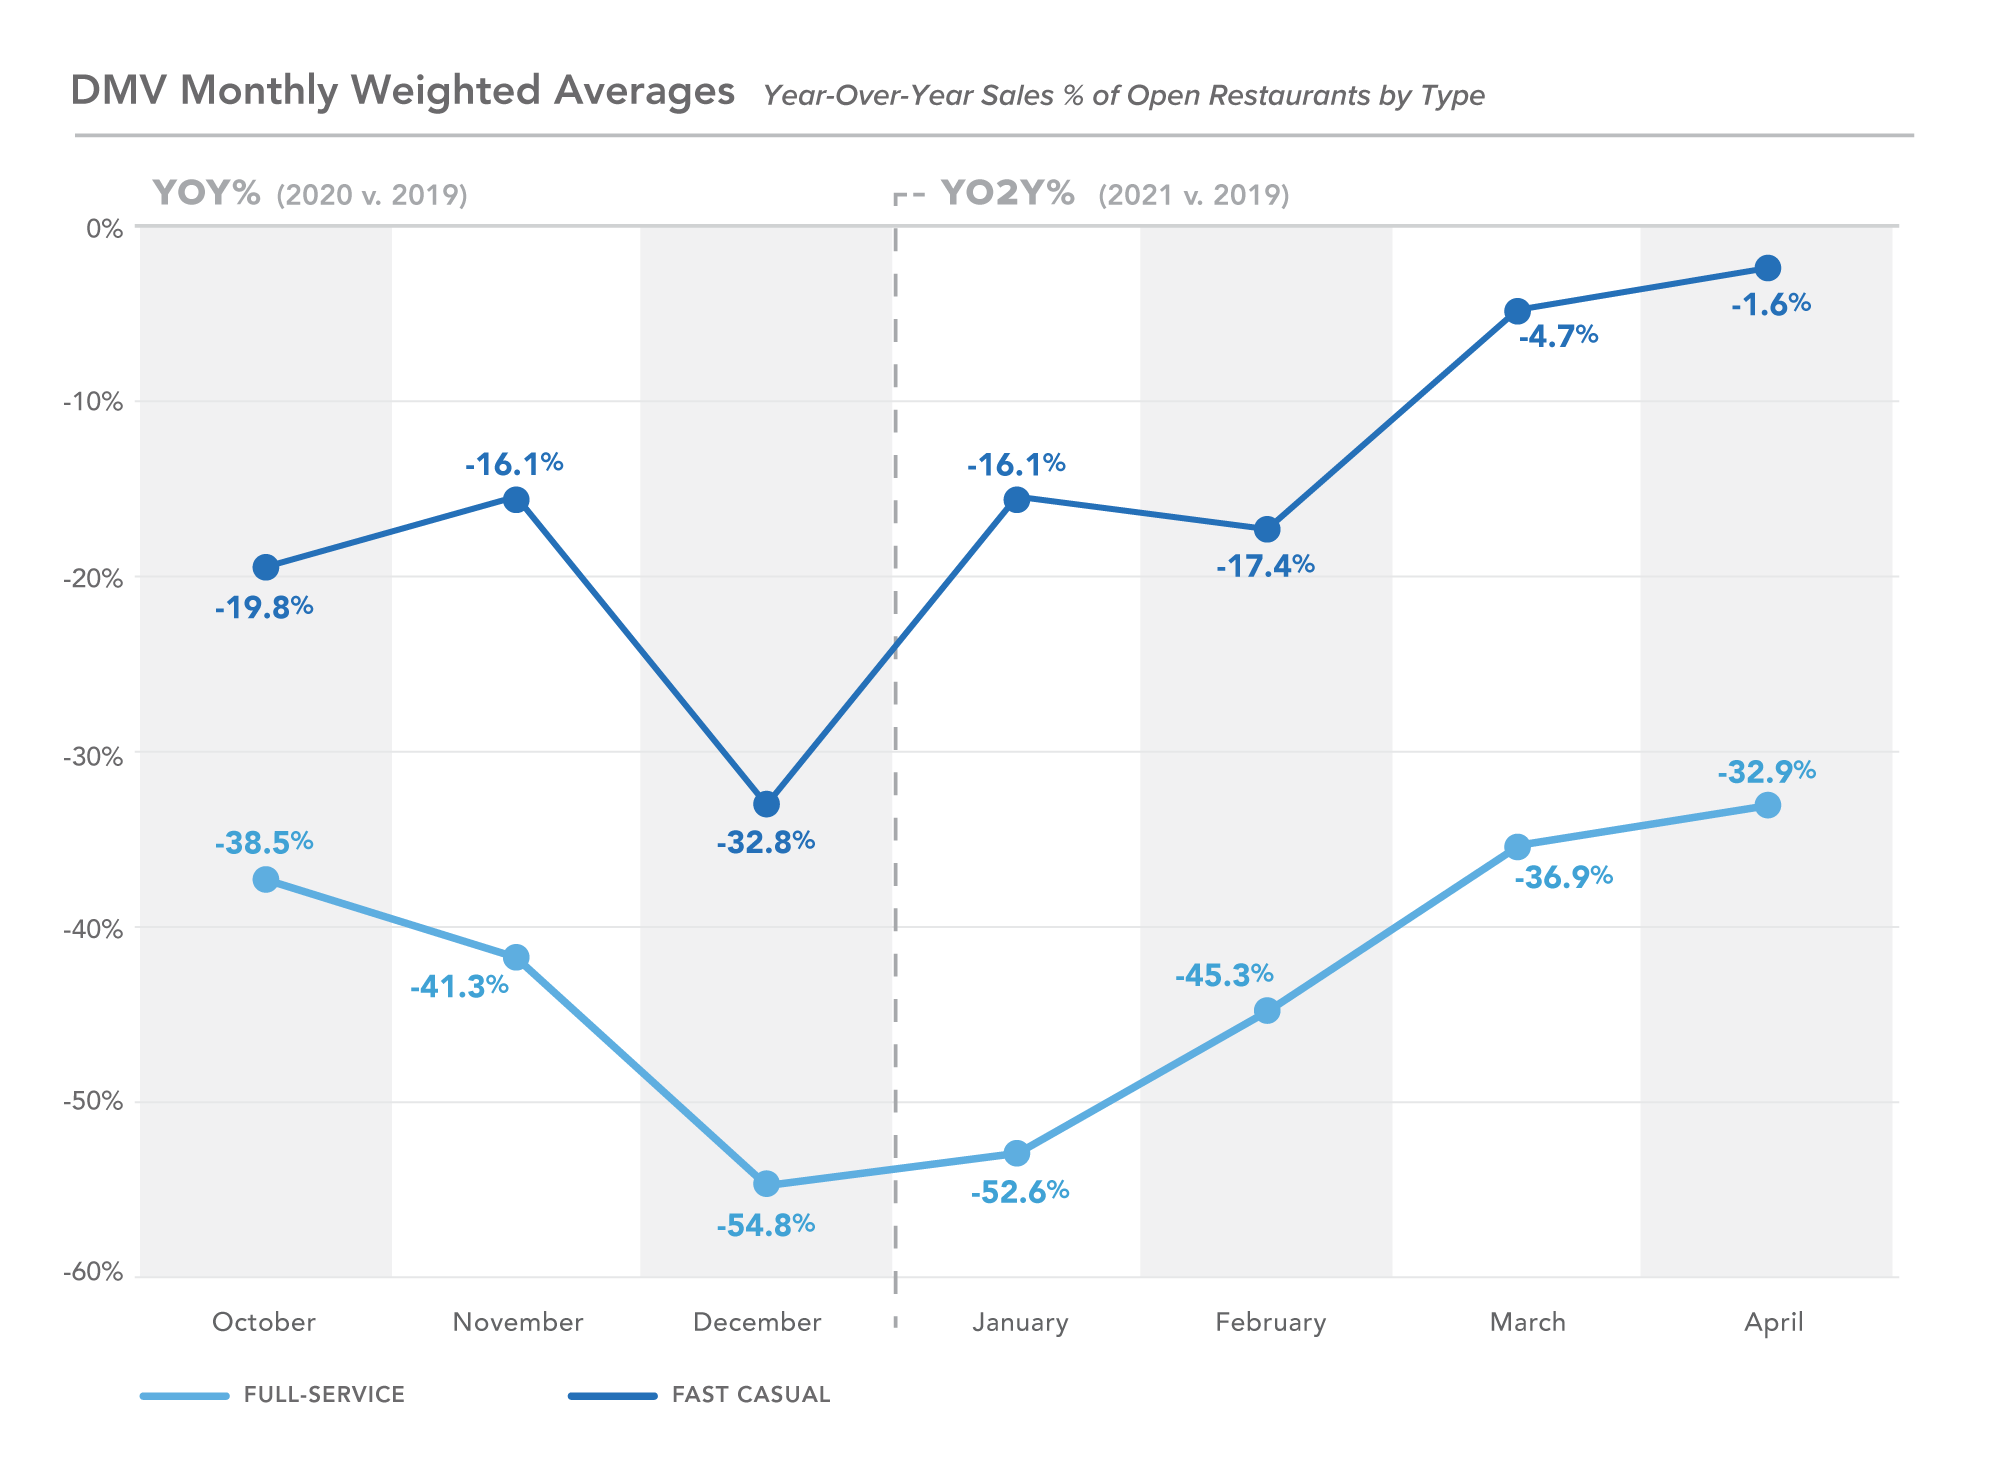 DMV Monthly Weighted Averages